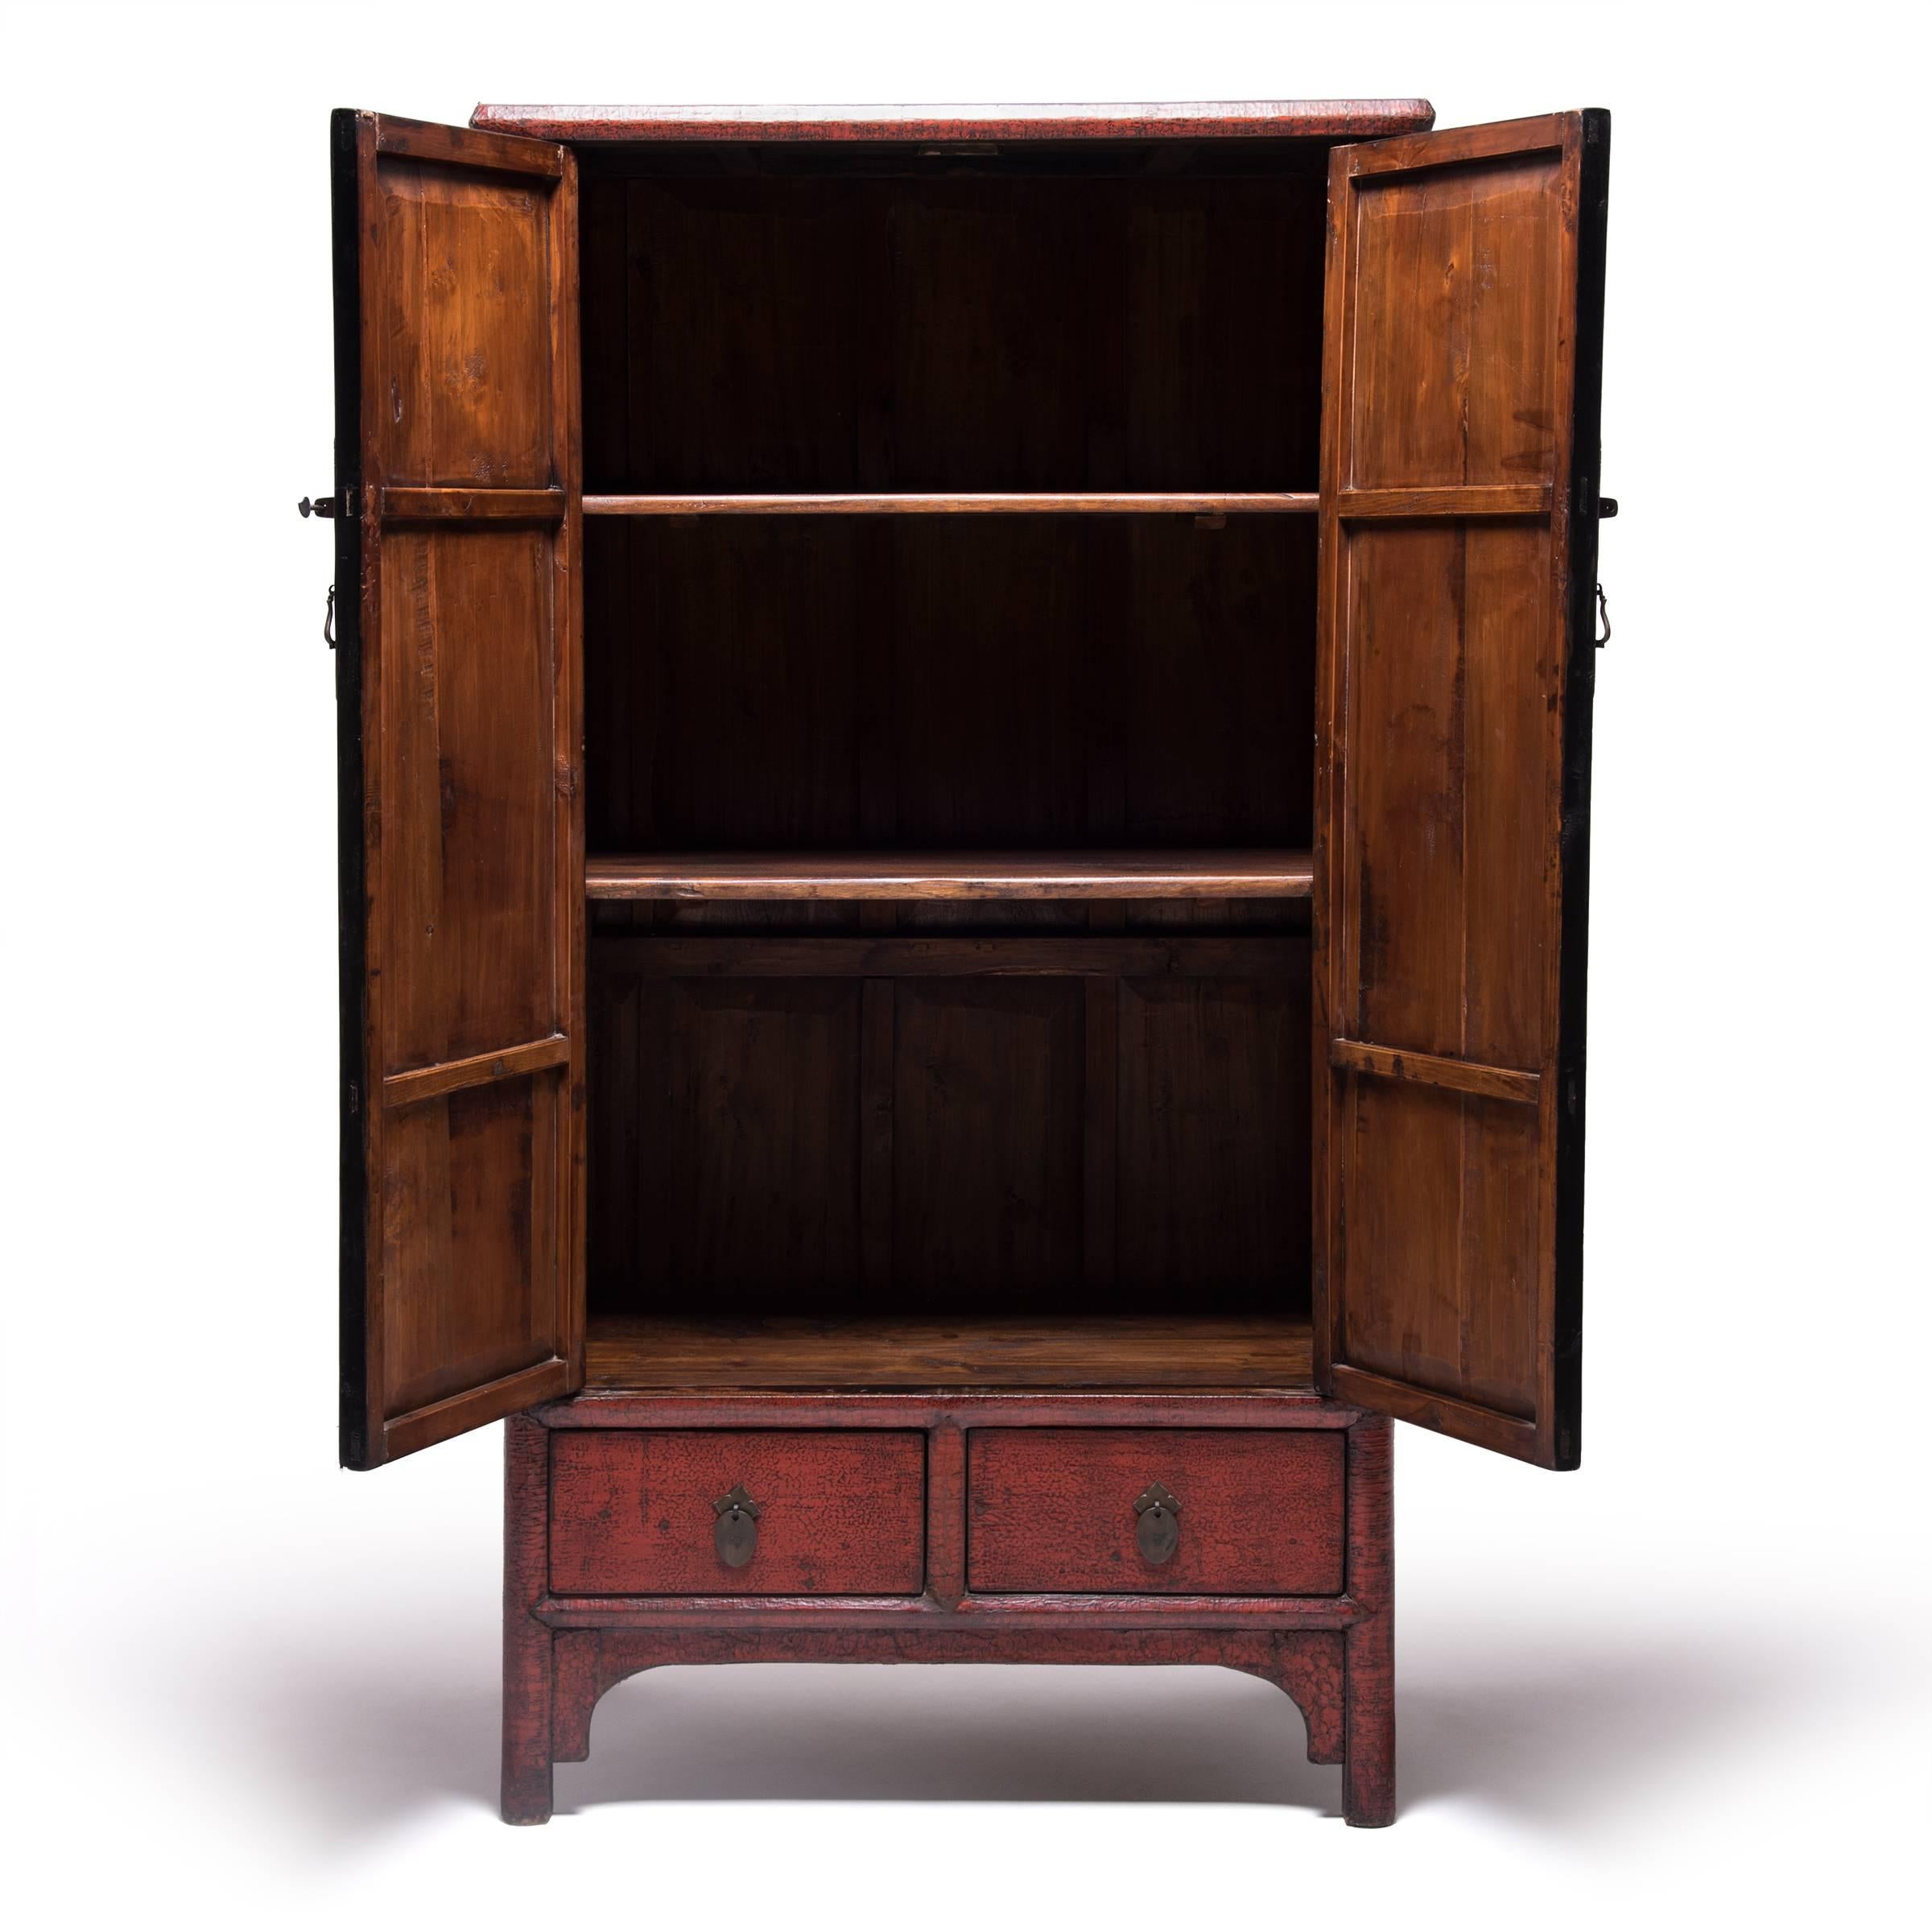 A classic piece of Chinese furniture, this 19th century lacquered cabinet possibly once occupied a home in China’s Shanxi Province, its shelves filled with curios or embroidered silks. It stands proudly with a top board reaching slightly beyond the